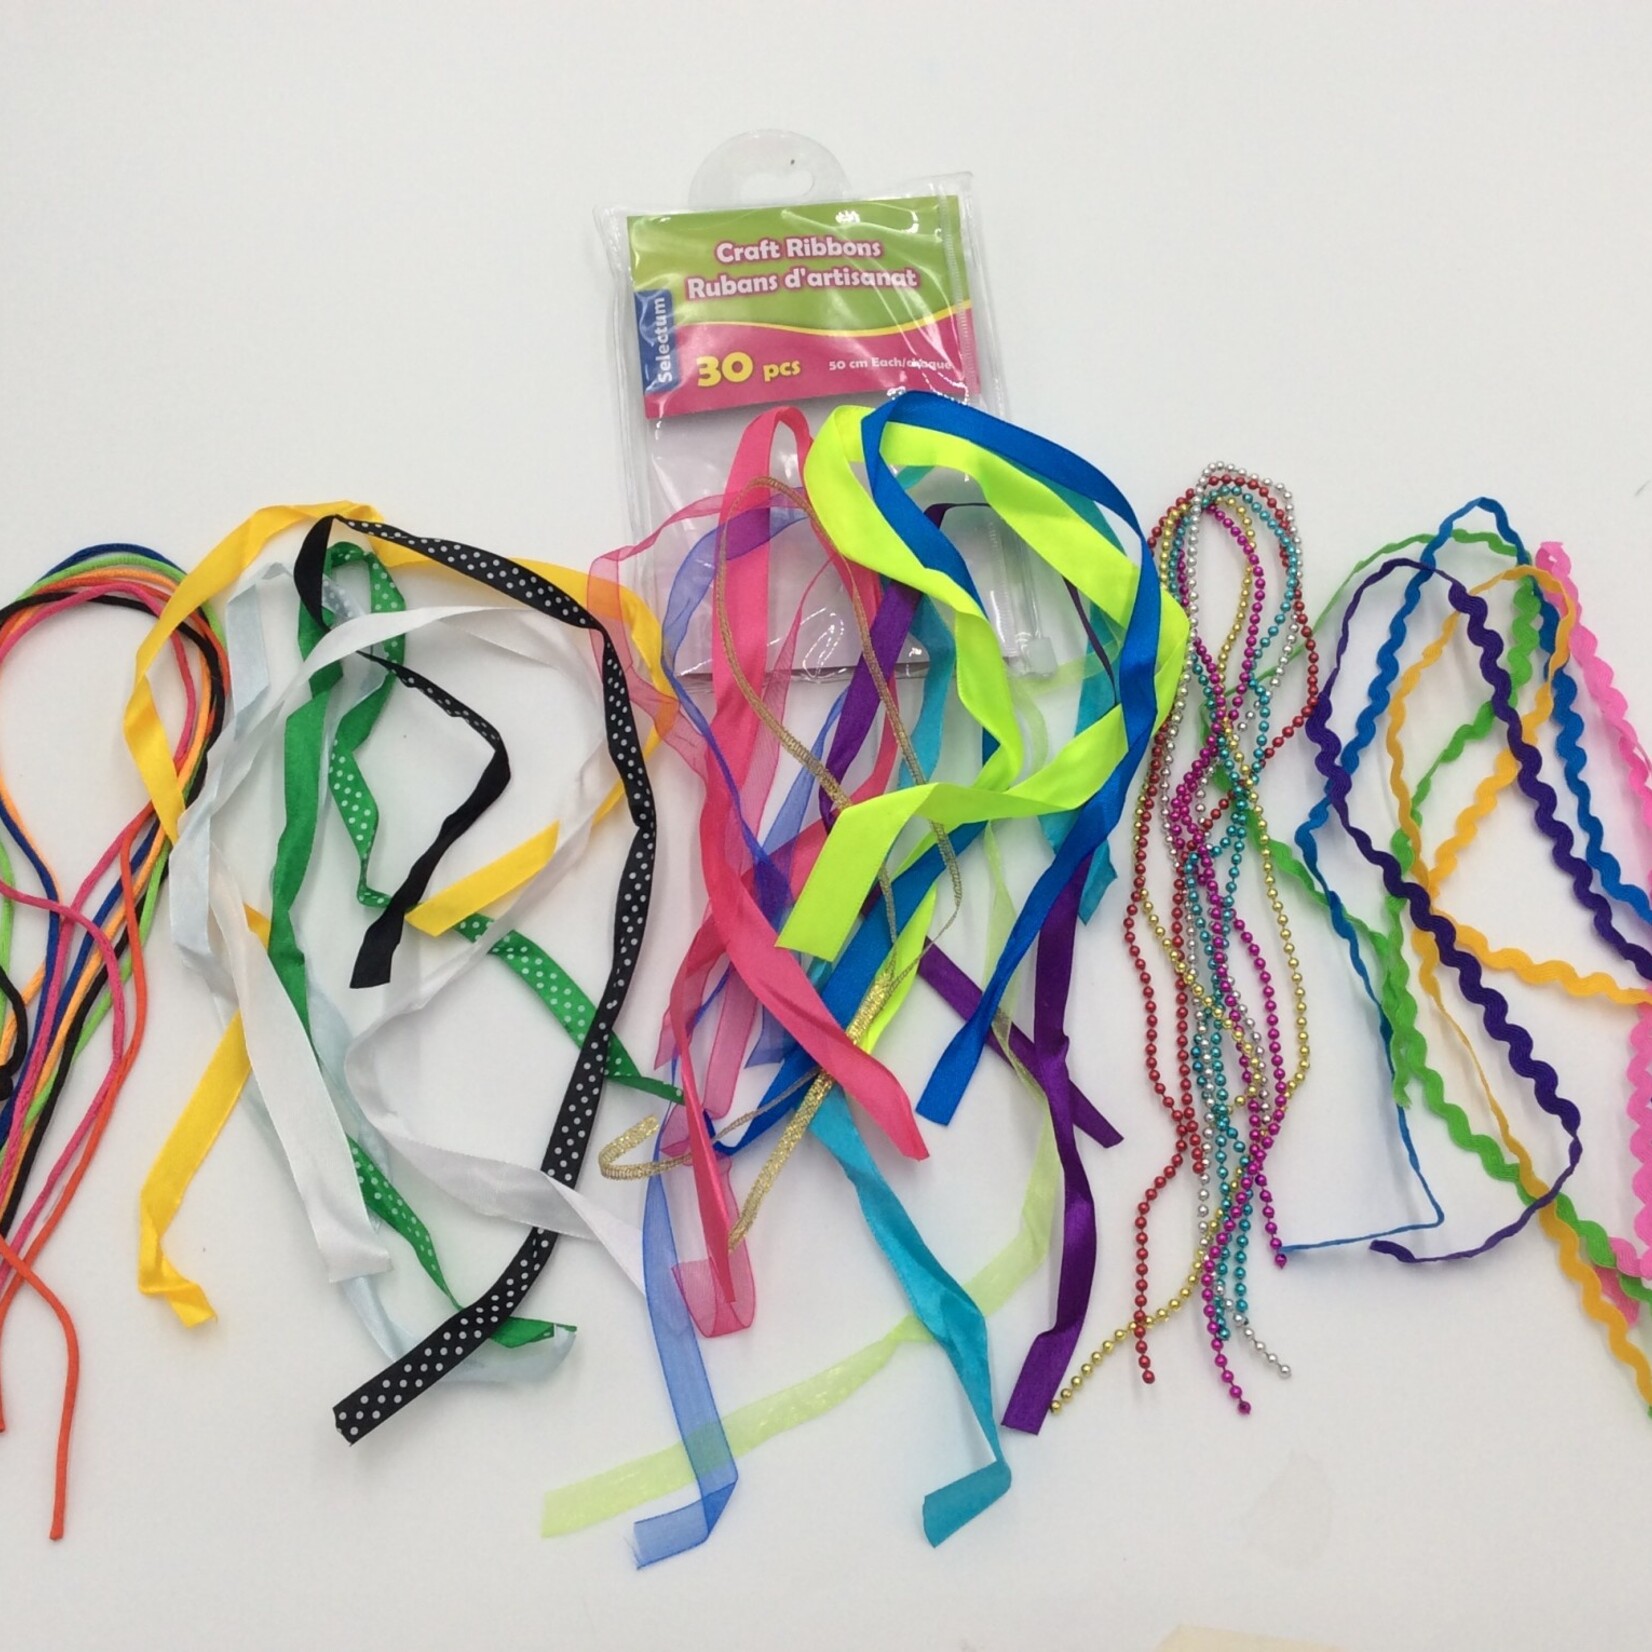 Assorted 8 Style Craft Ribbons 30CT (50cm)